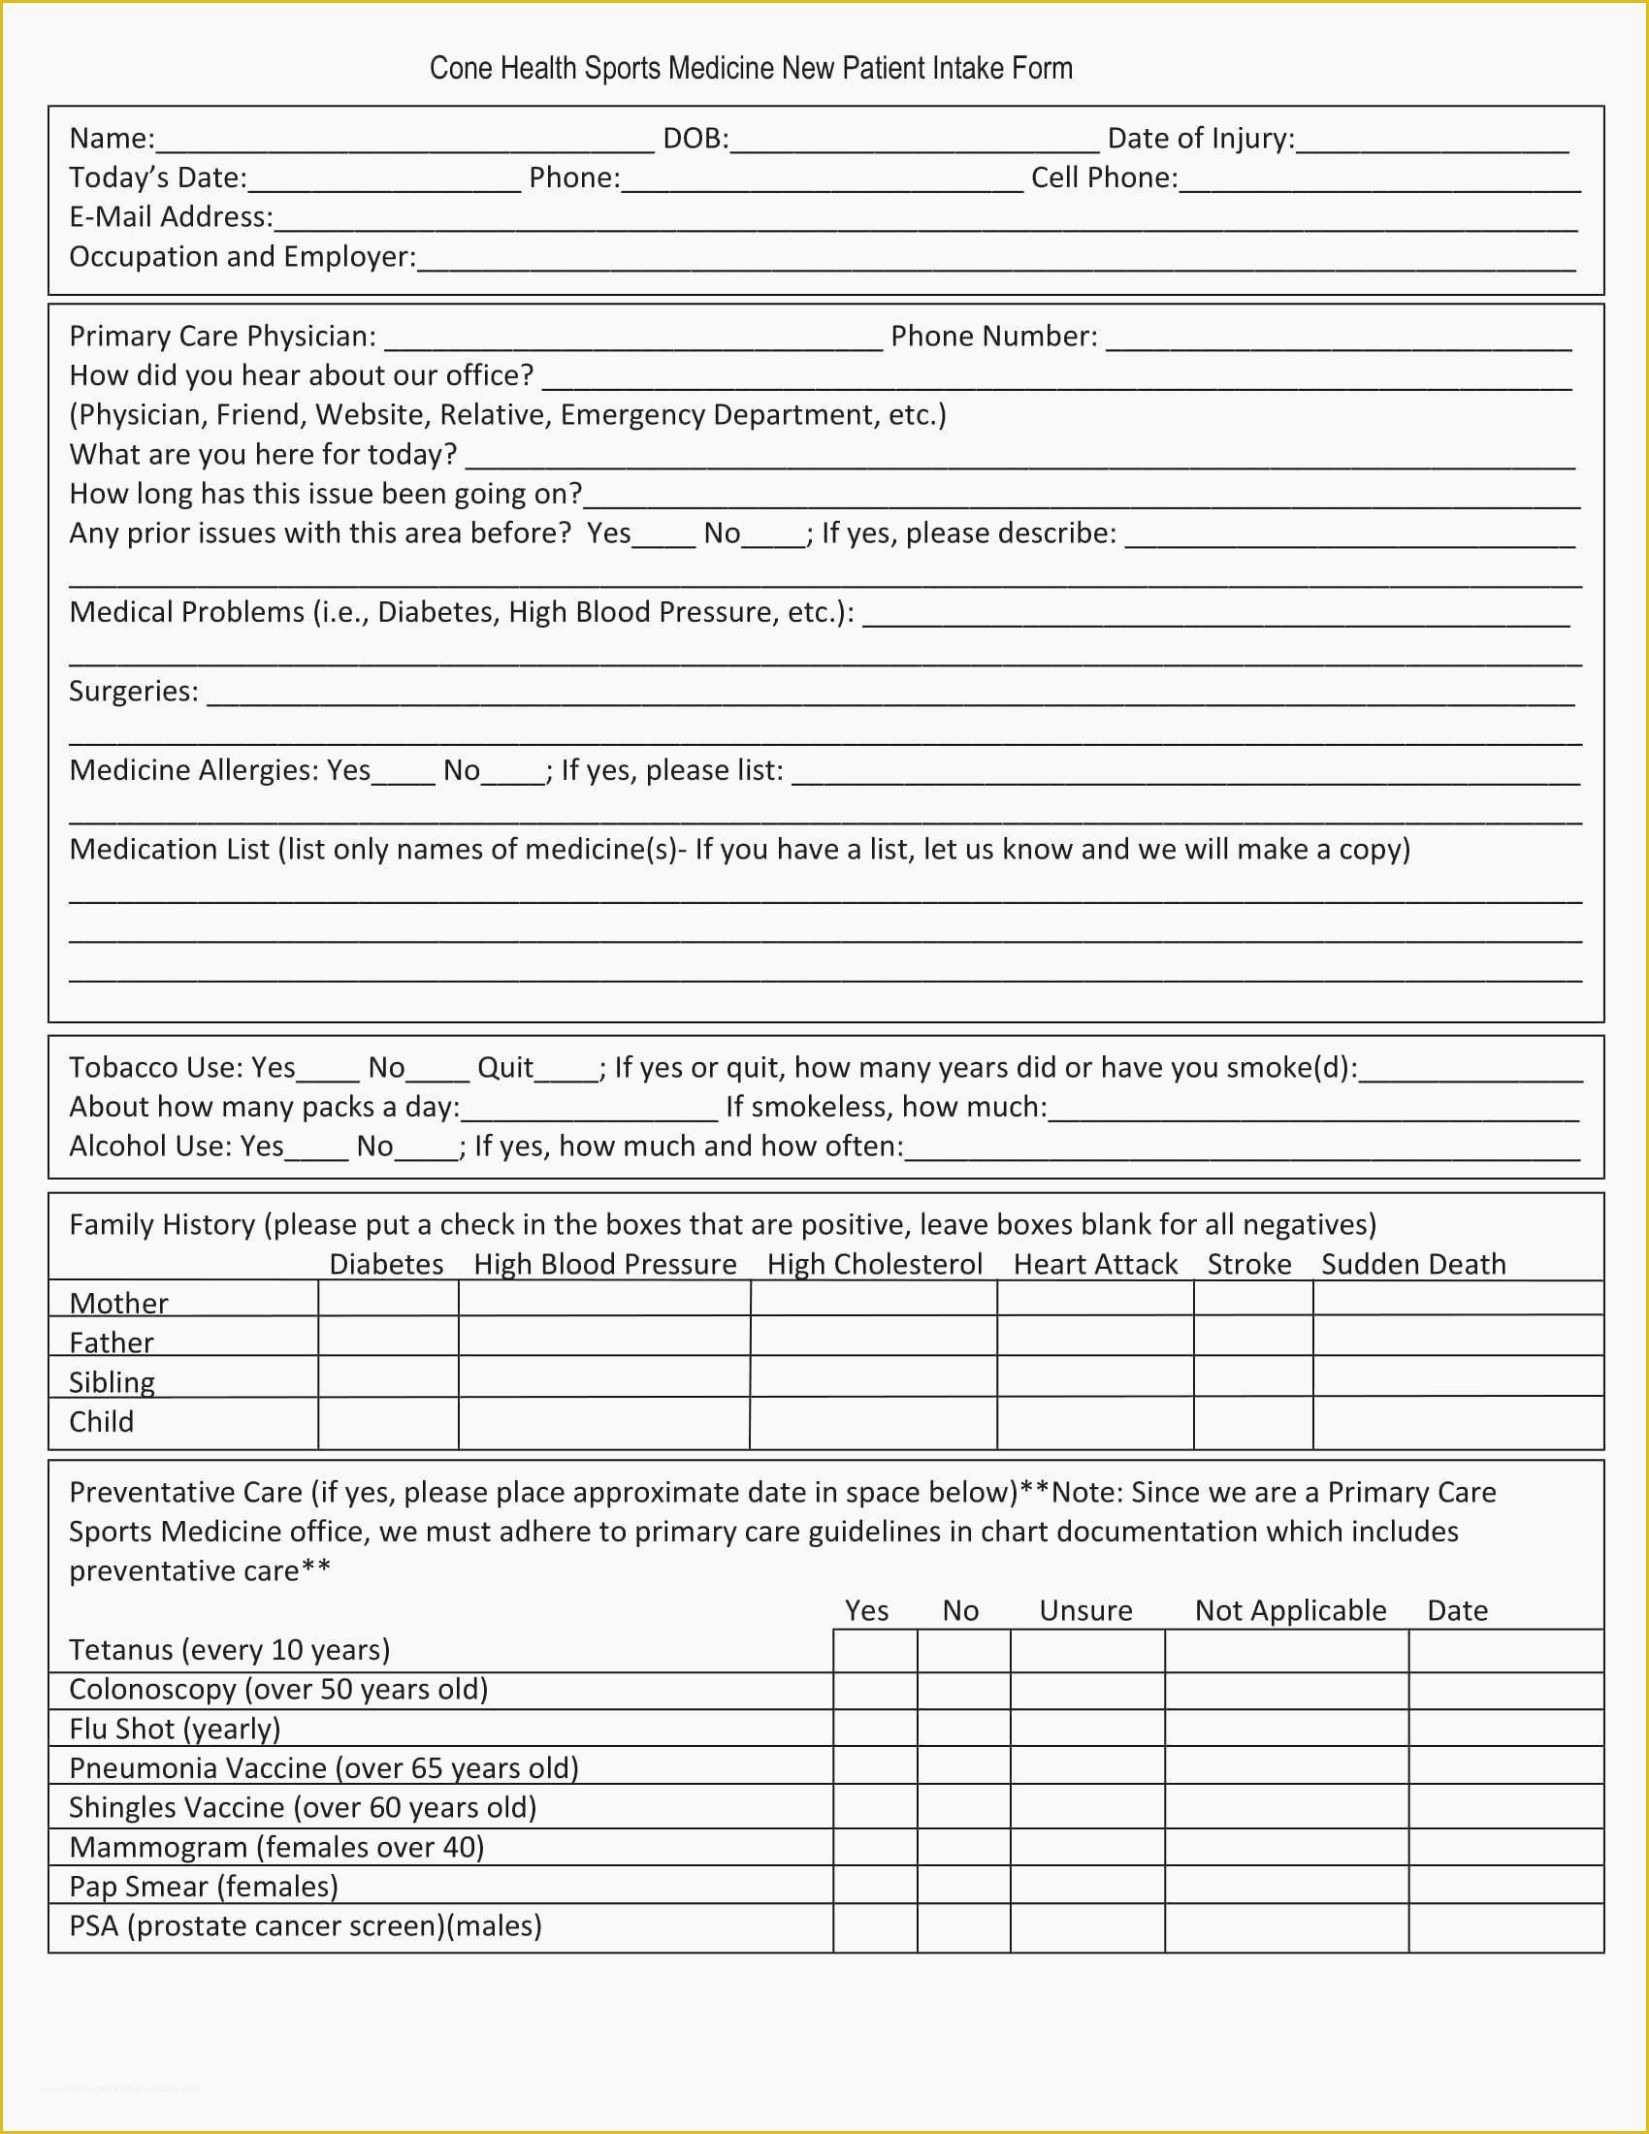 Free Patient Intake form Template Of the History Free New Patient